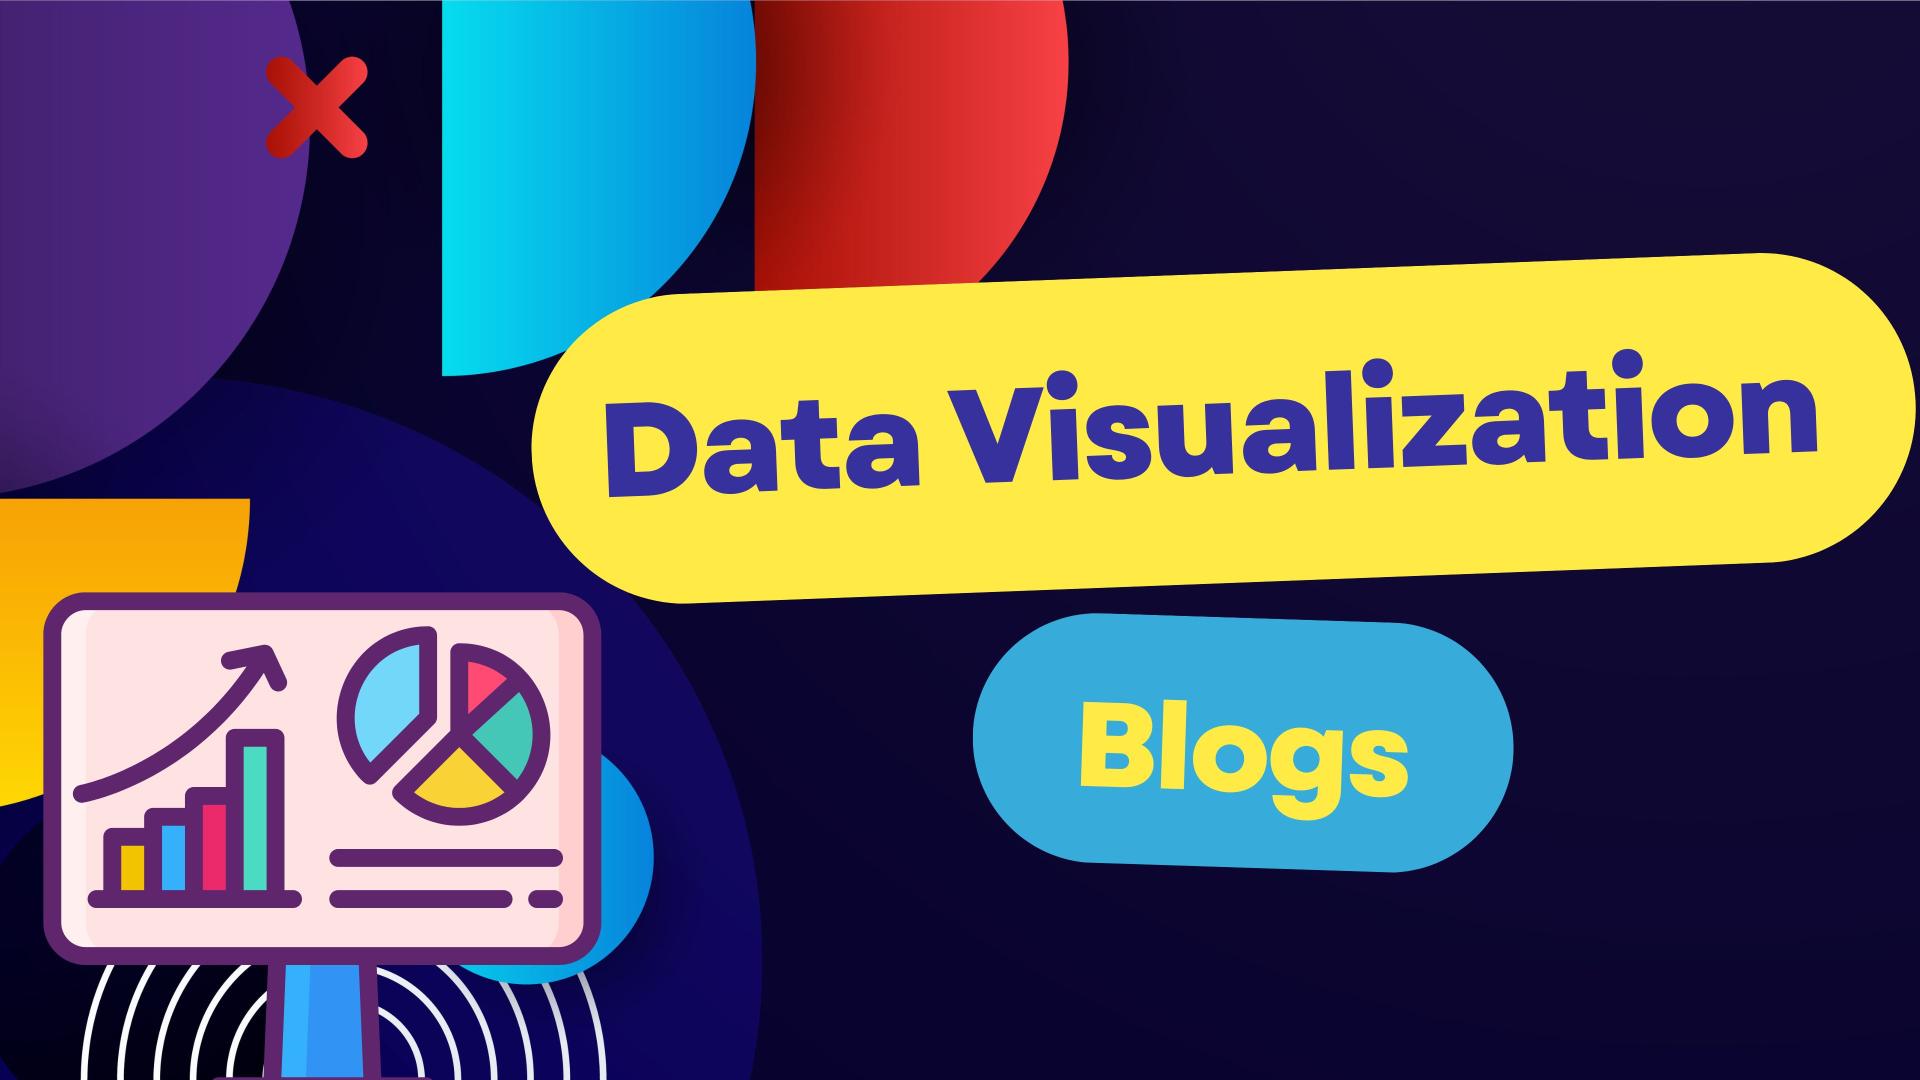 Data visualization blogs you should read in 2023